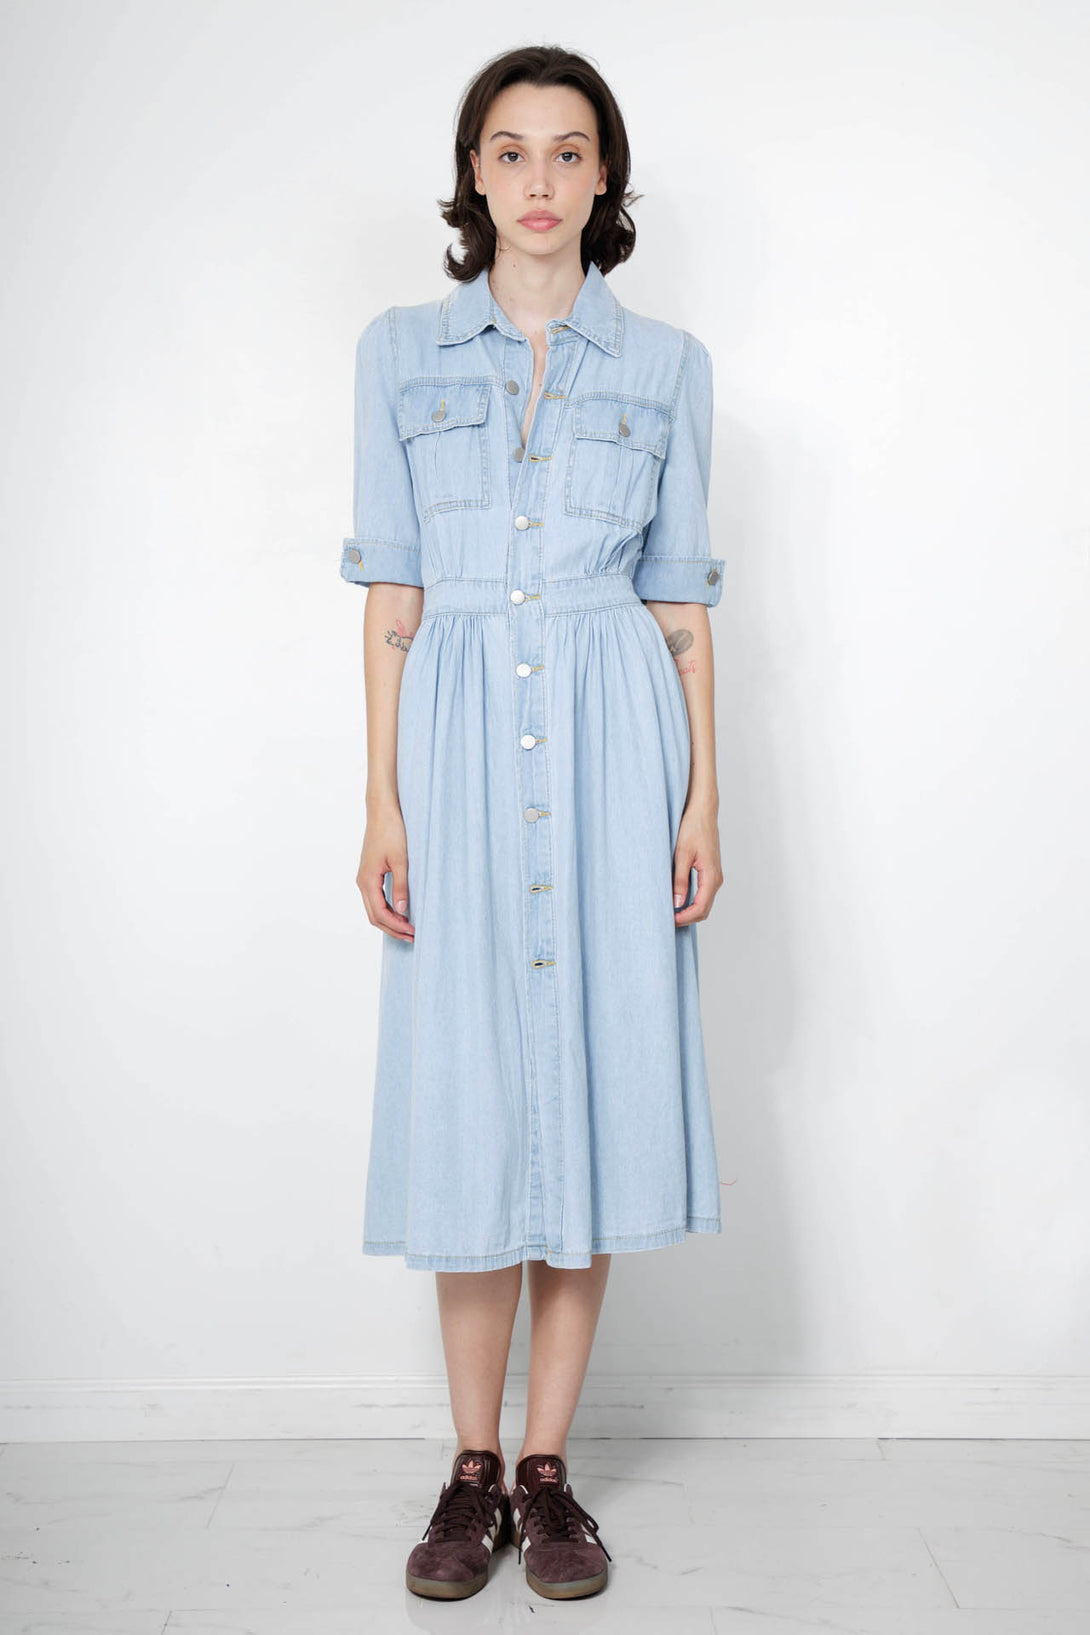 jeans shirt dress for women, HT 360 Collective, outfit denim shirt, denim midi shirt dress, 